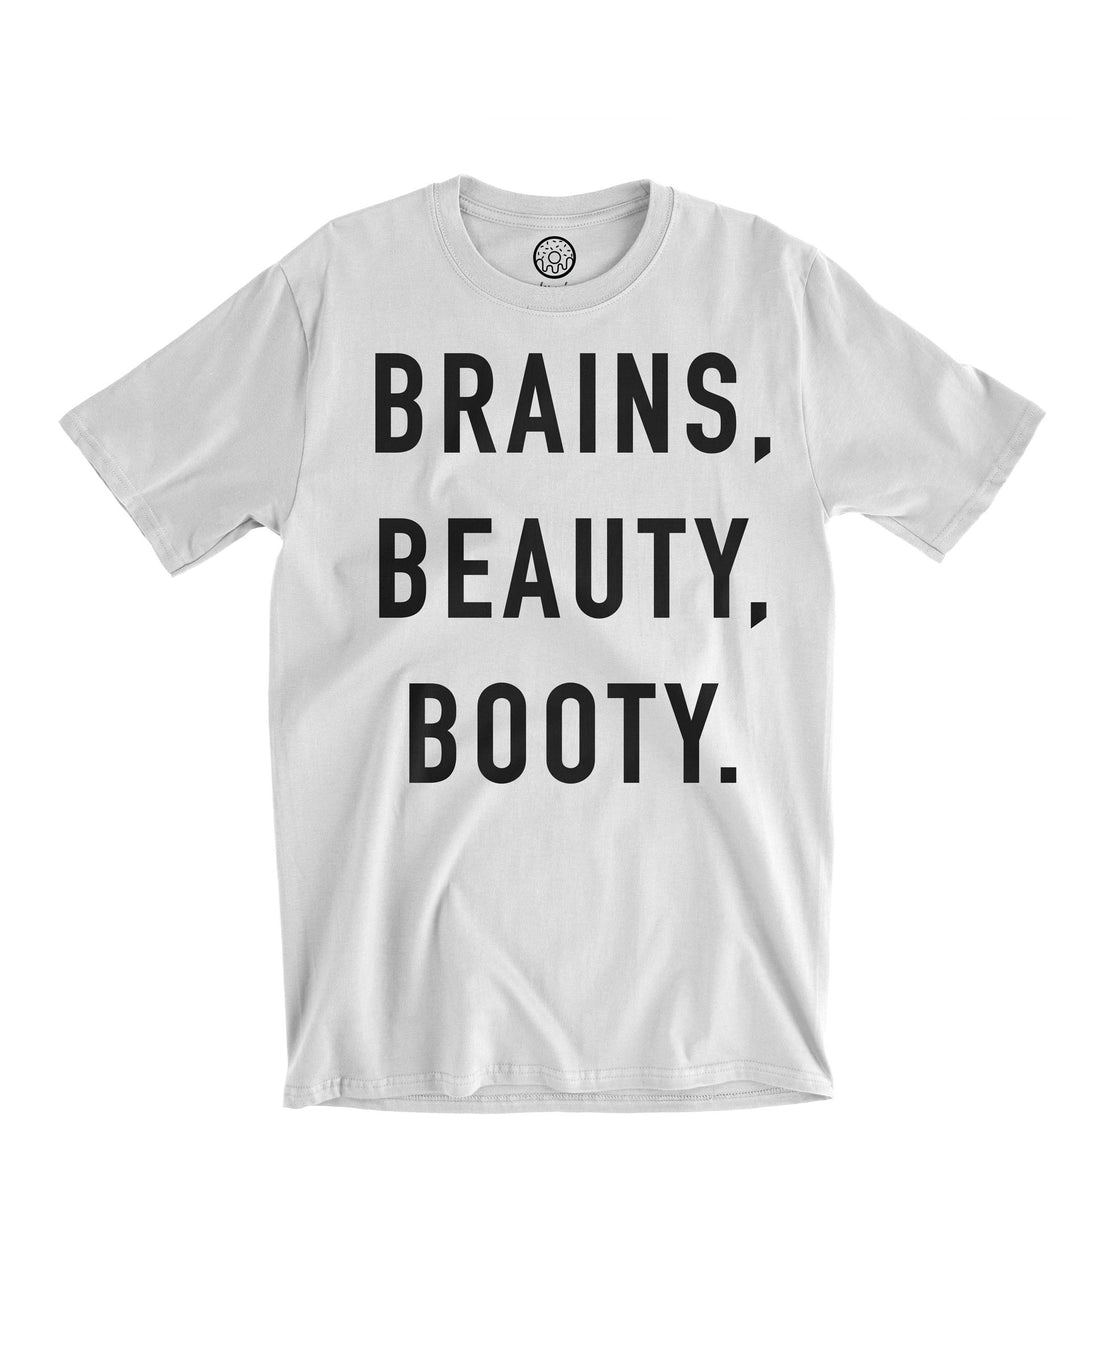 Brains & Booty - White Tee – Muscles and Donuts